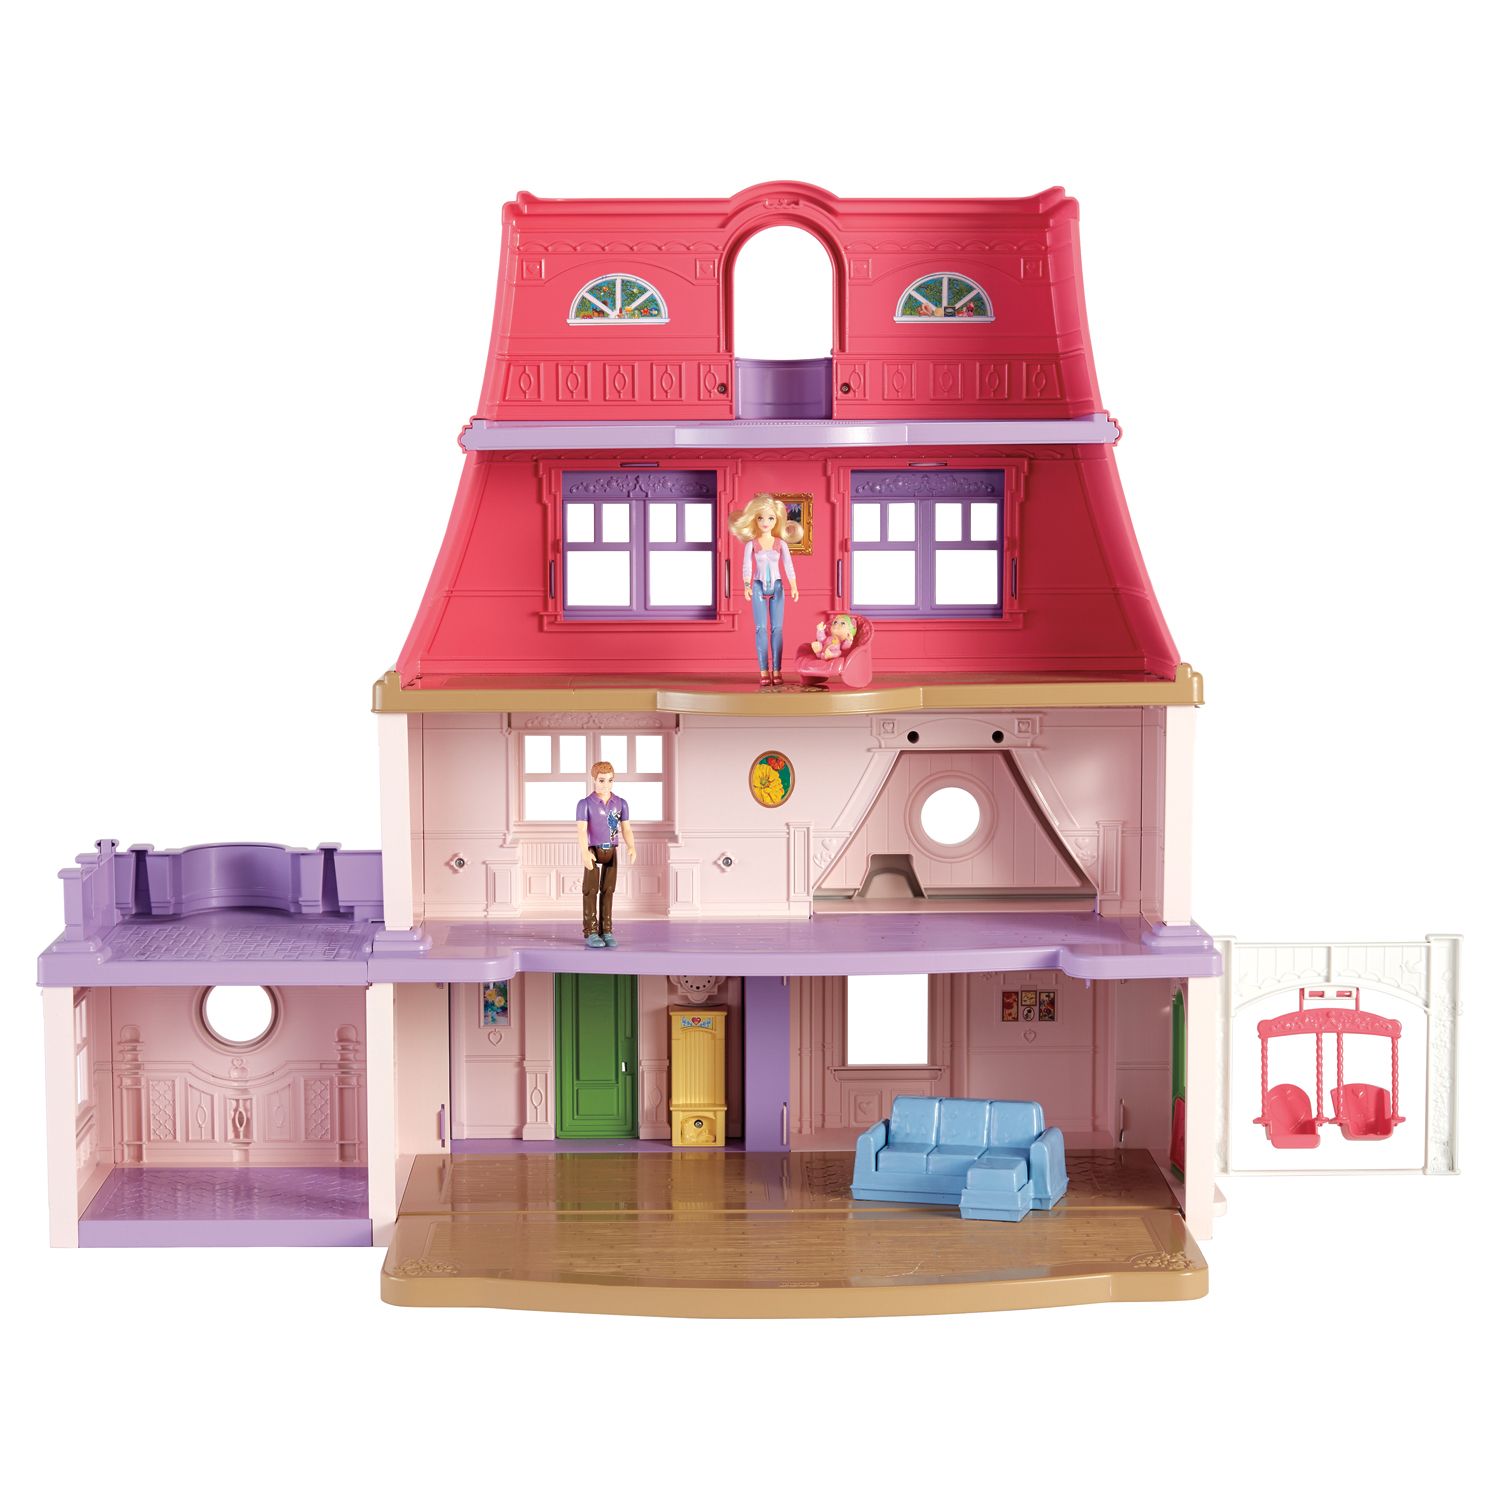 fisher price dollhouse